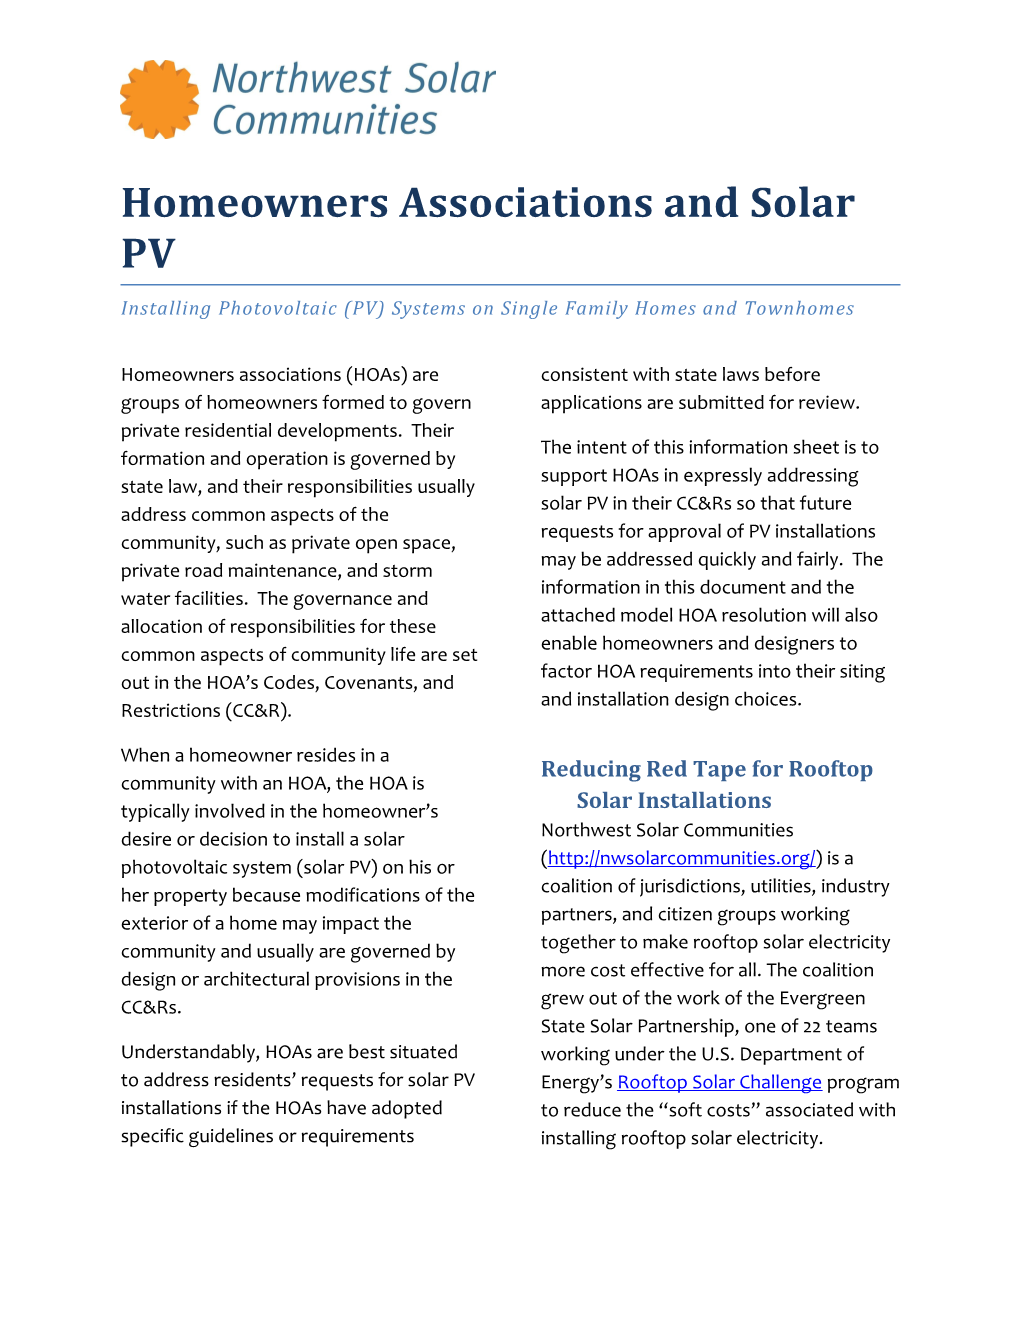 Homeowners Associations and Solar PV